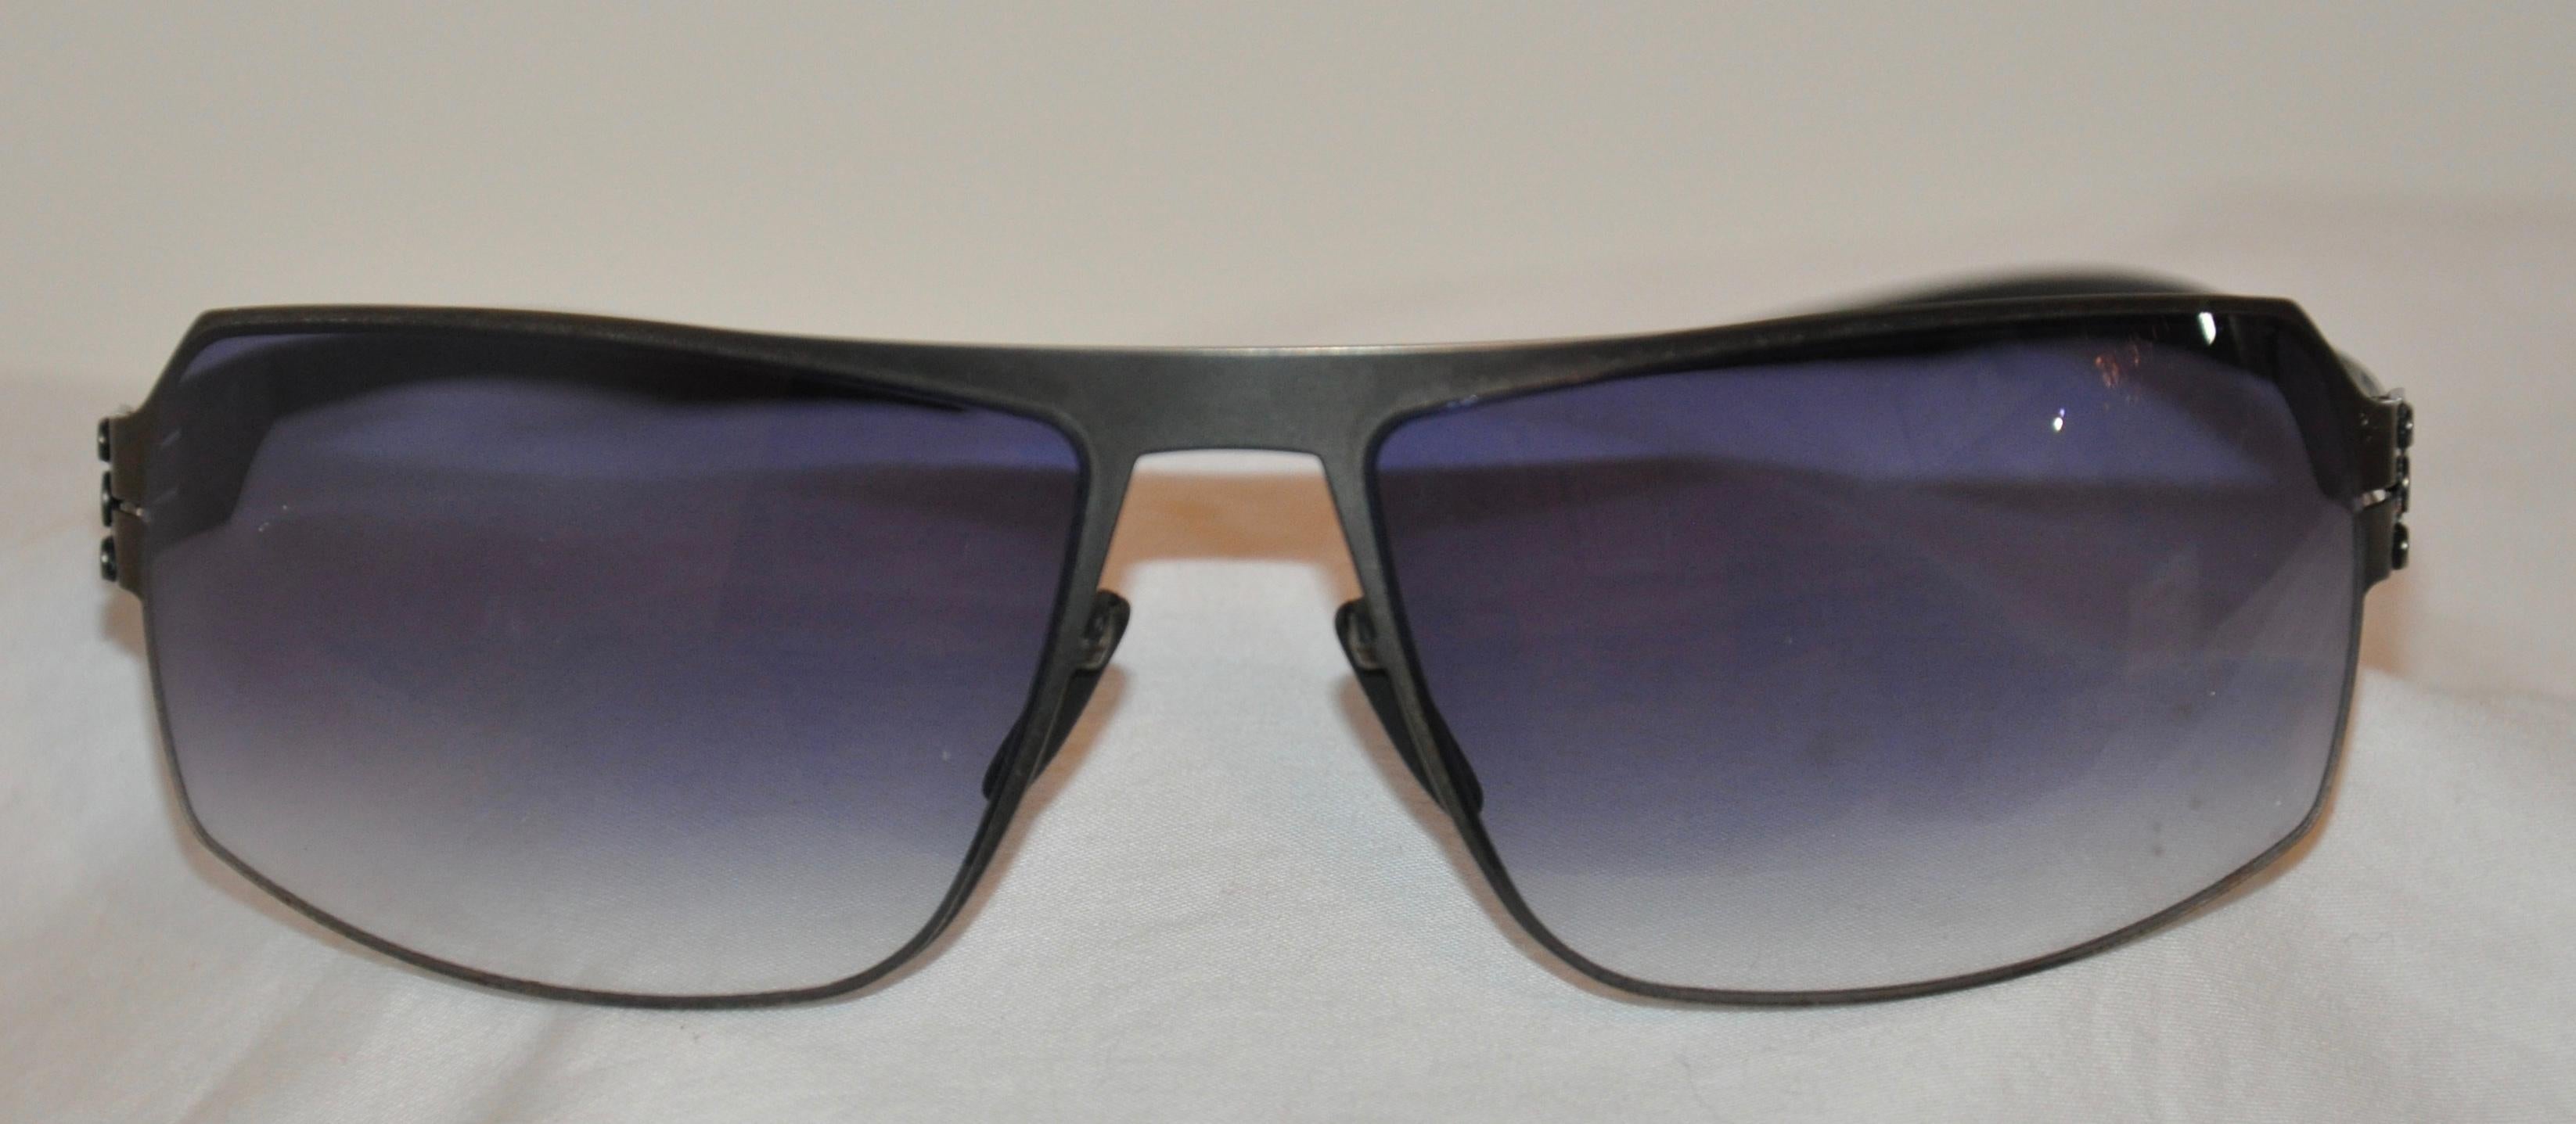    Ic! Berlin Black curved-styled flexible titanium blue-hue sunglasses, made in Germany, measures 5 1/2 inches across the front. Measuring the curve aspect from right-to-left measures 6 1/2 inches, height is 1 5/8 inches, and the arms are 5 1/2